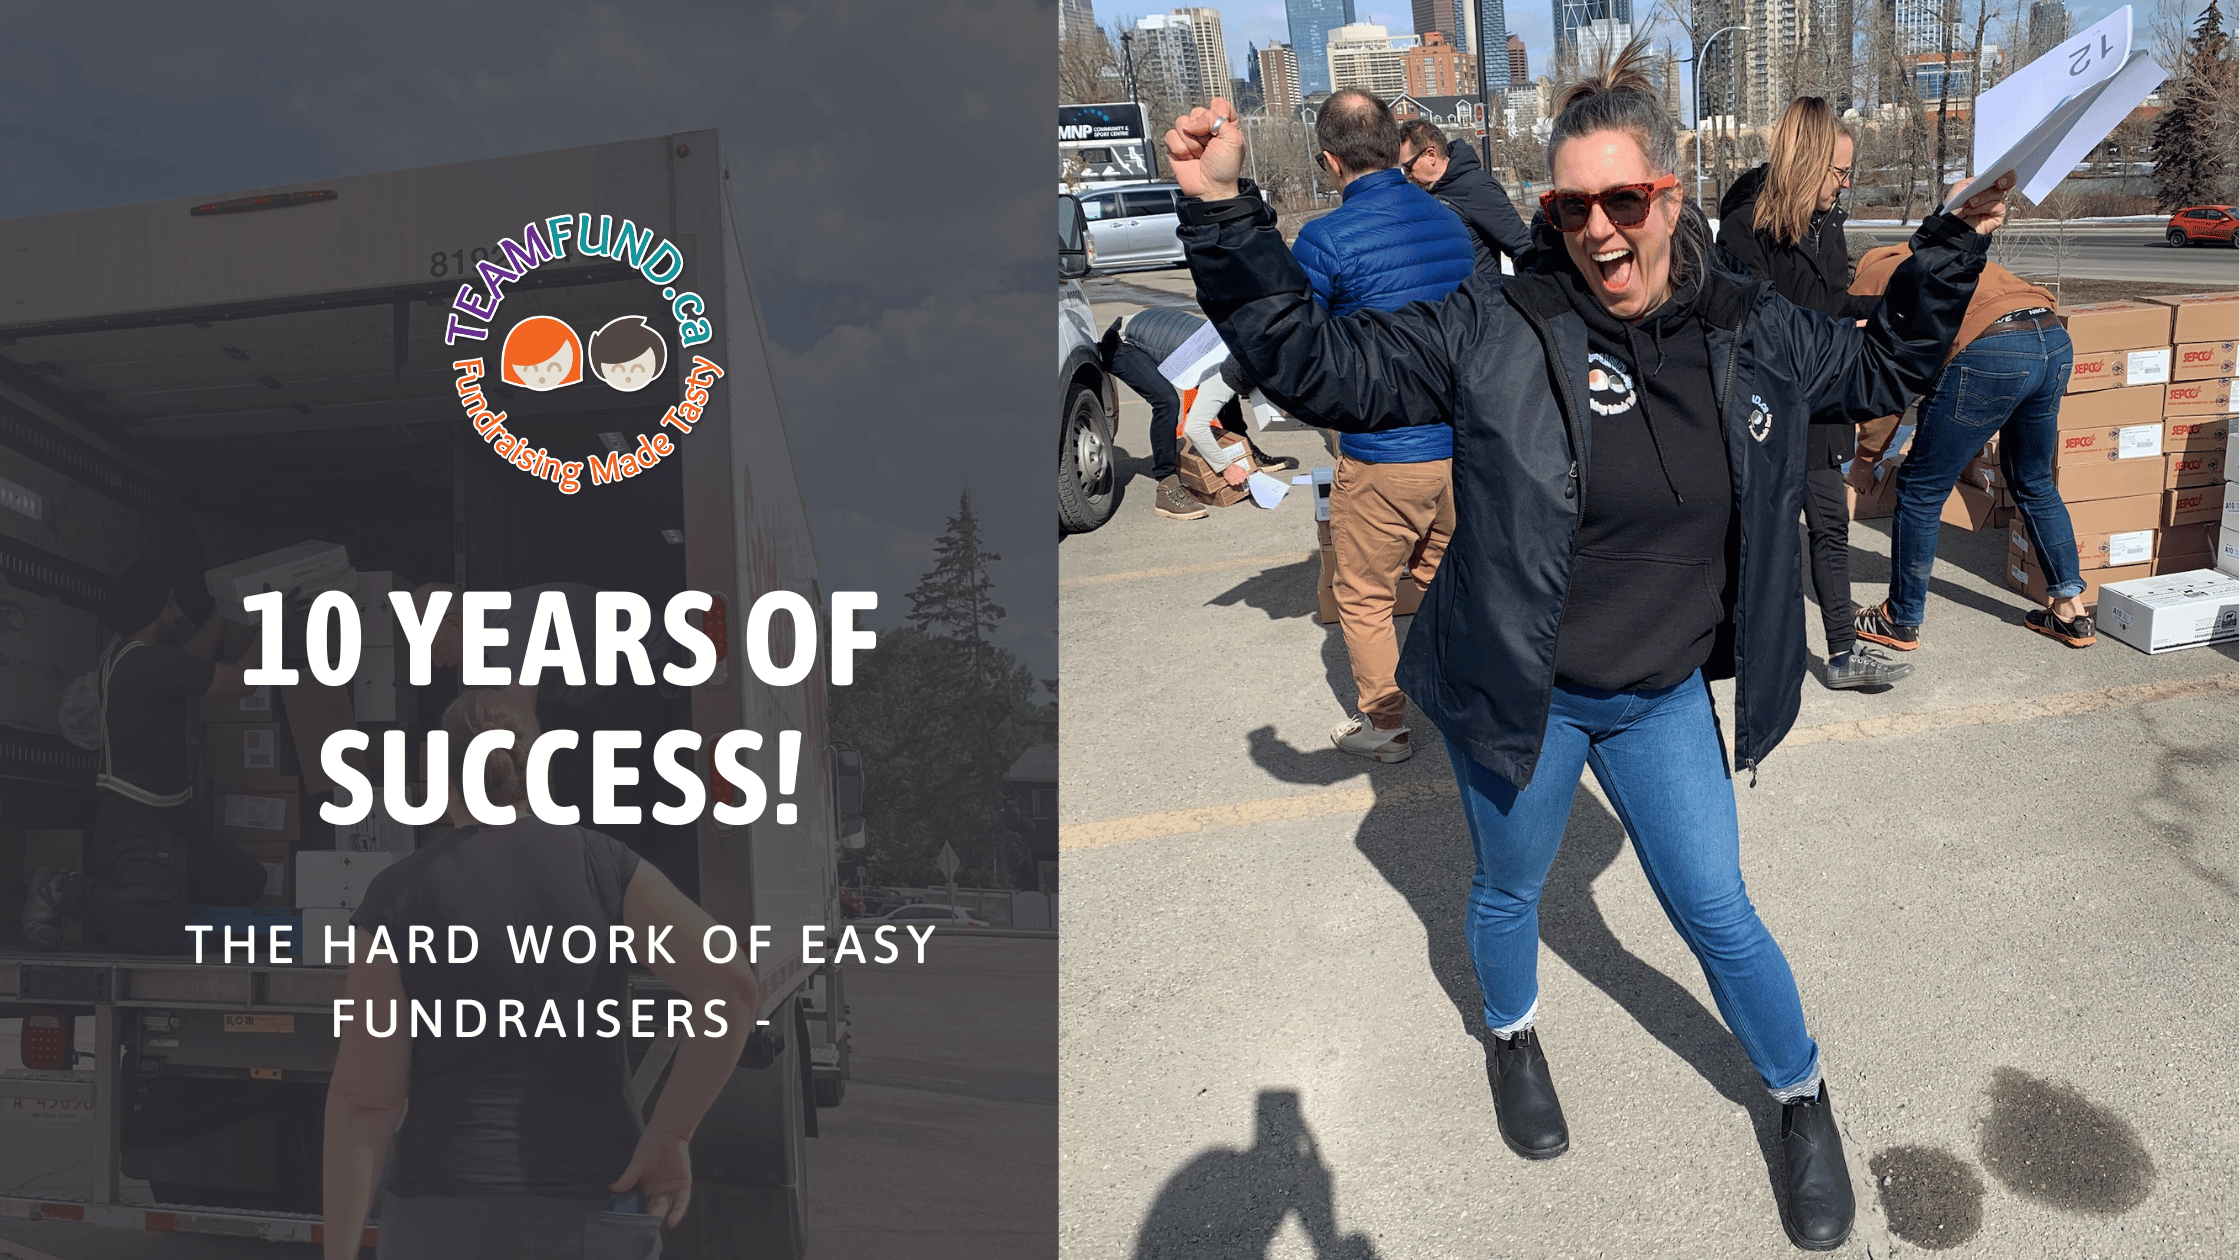 The Hard Work of Easy Fundraisers: 10 Years of Success